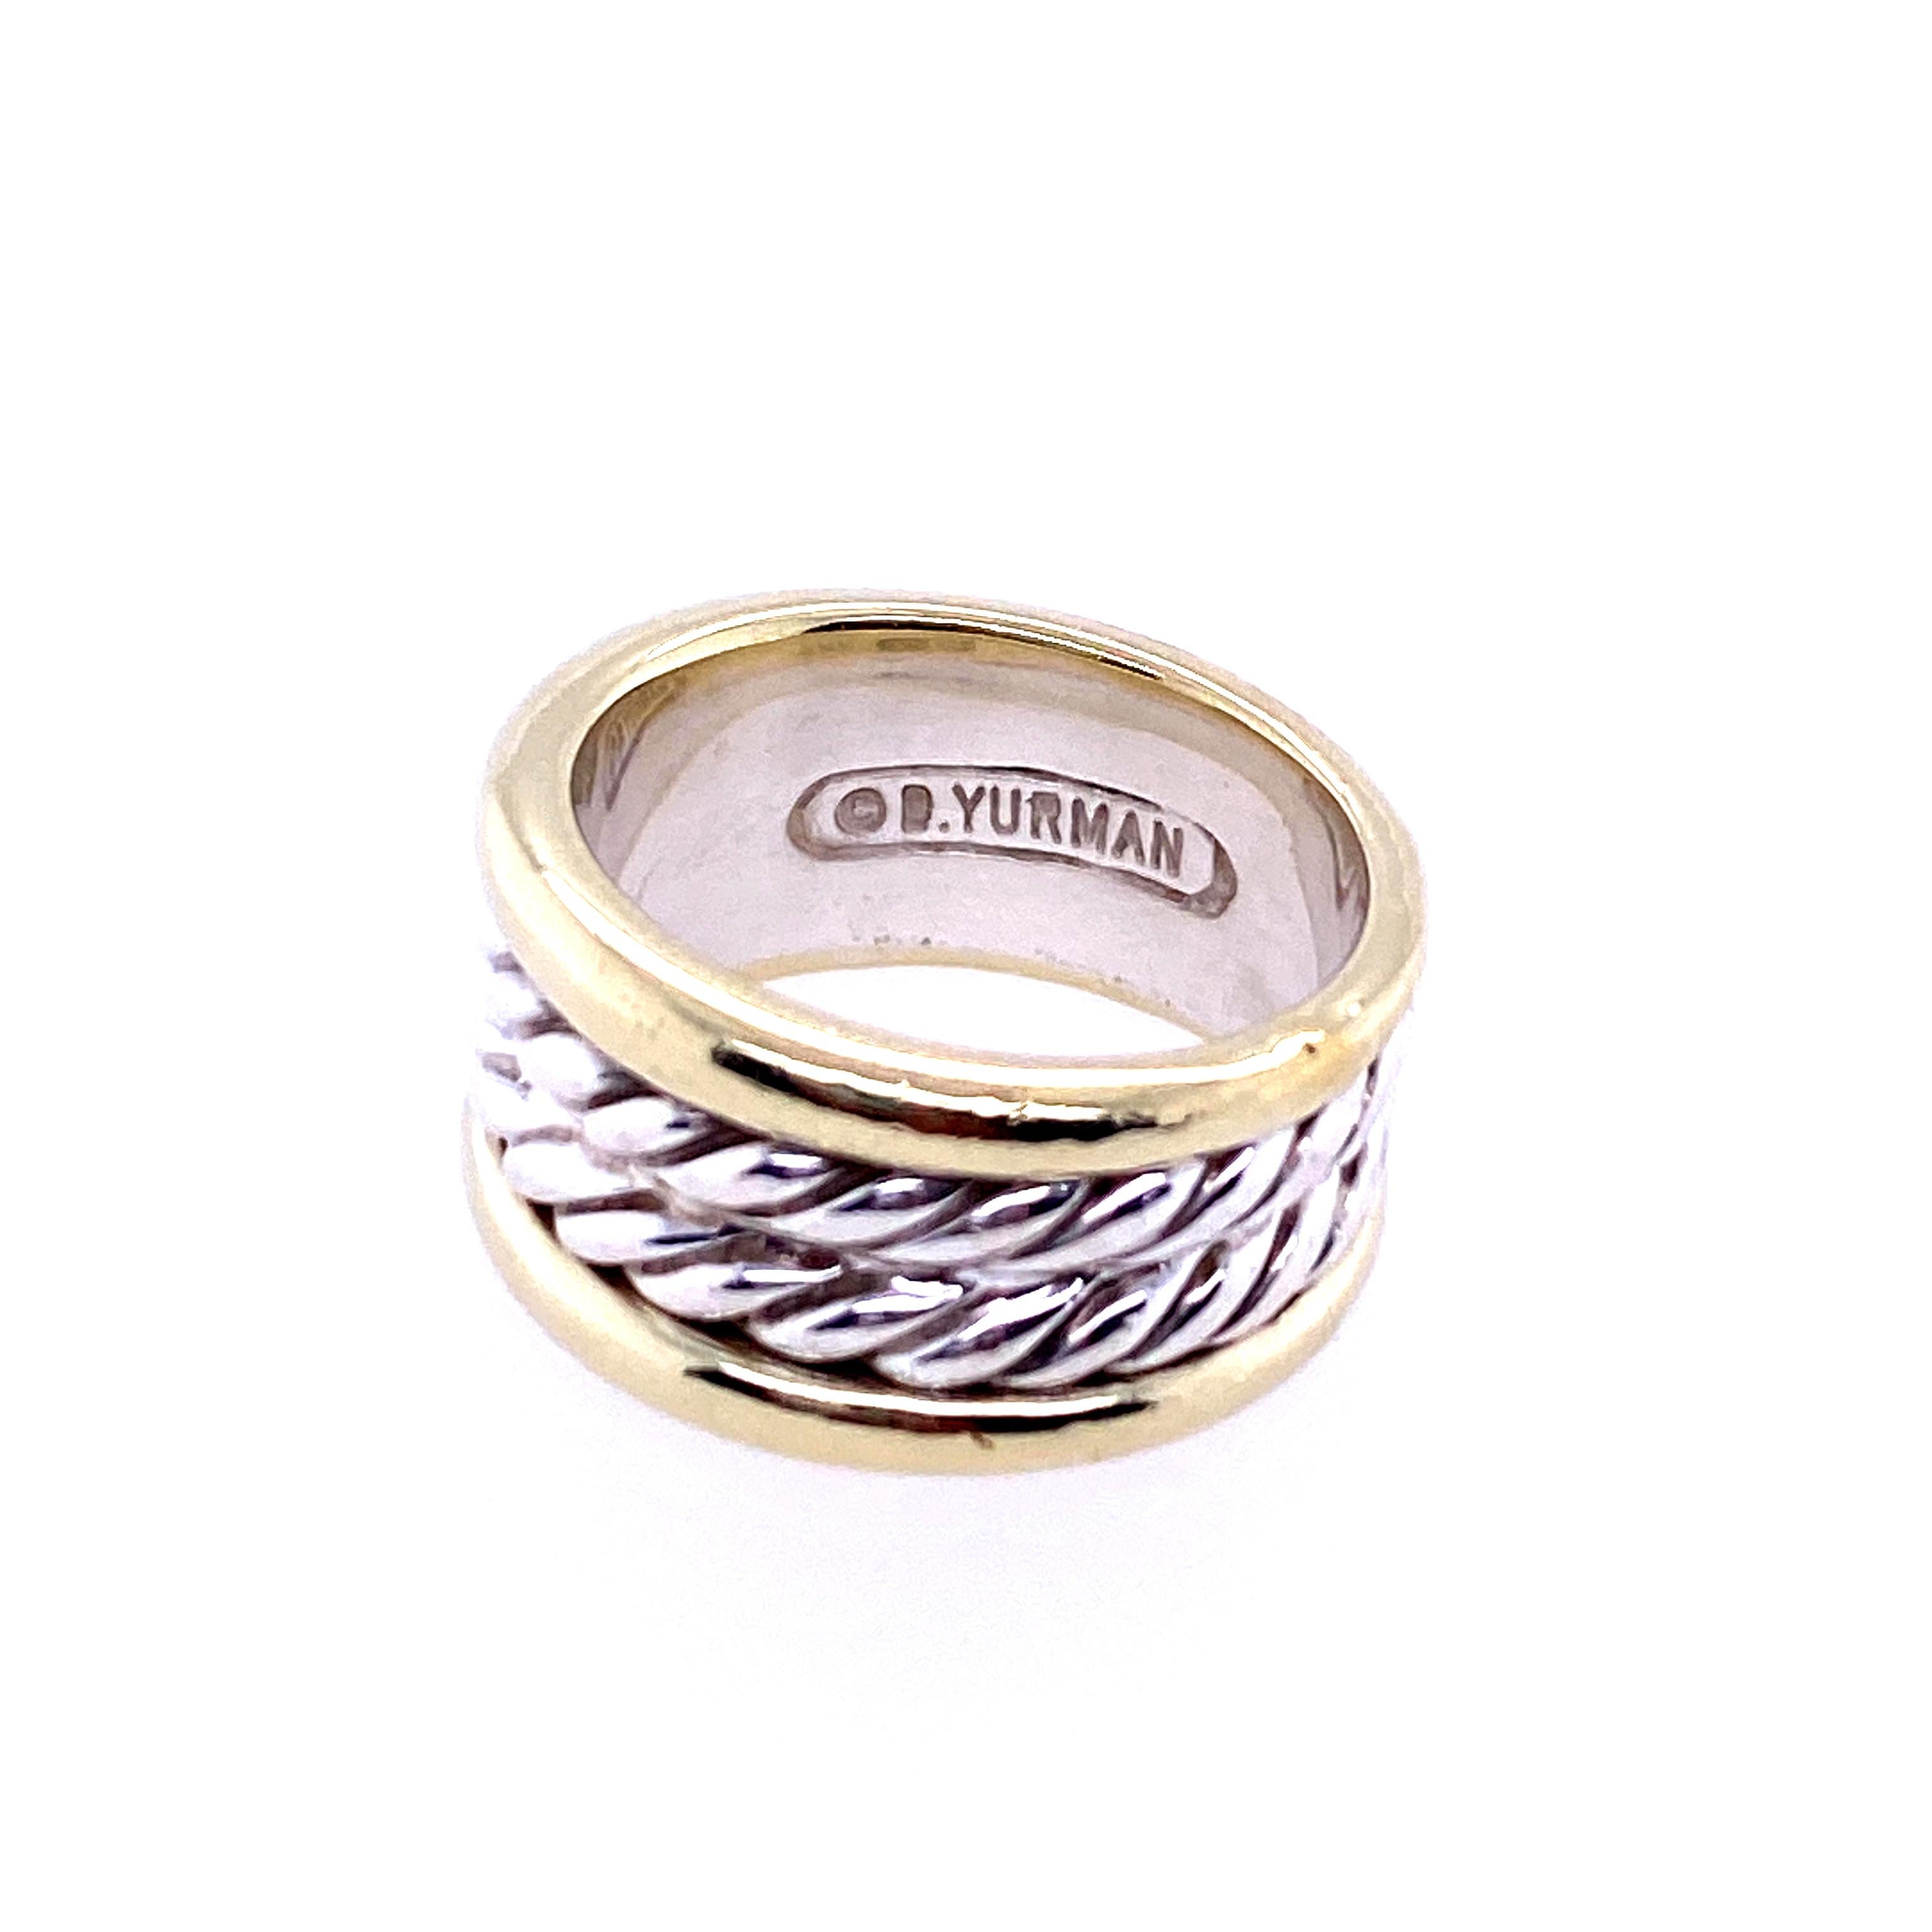 One sterling silver and 14 karat yellow gold ring (stamped 585 925 5.5m D. YURMAN) with a sterling silver double cable center and 14 karat yellow gold outer edges.  The ring measures 10.3mm wide and is a finger size 5.5.